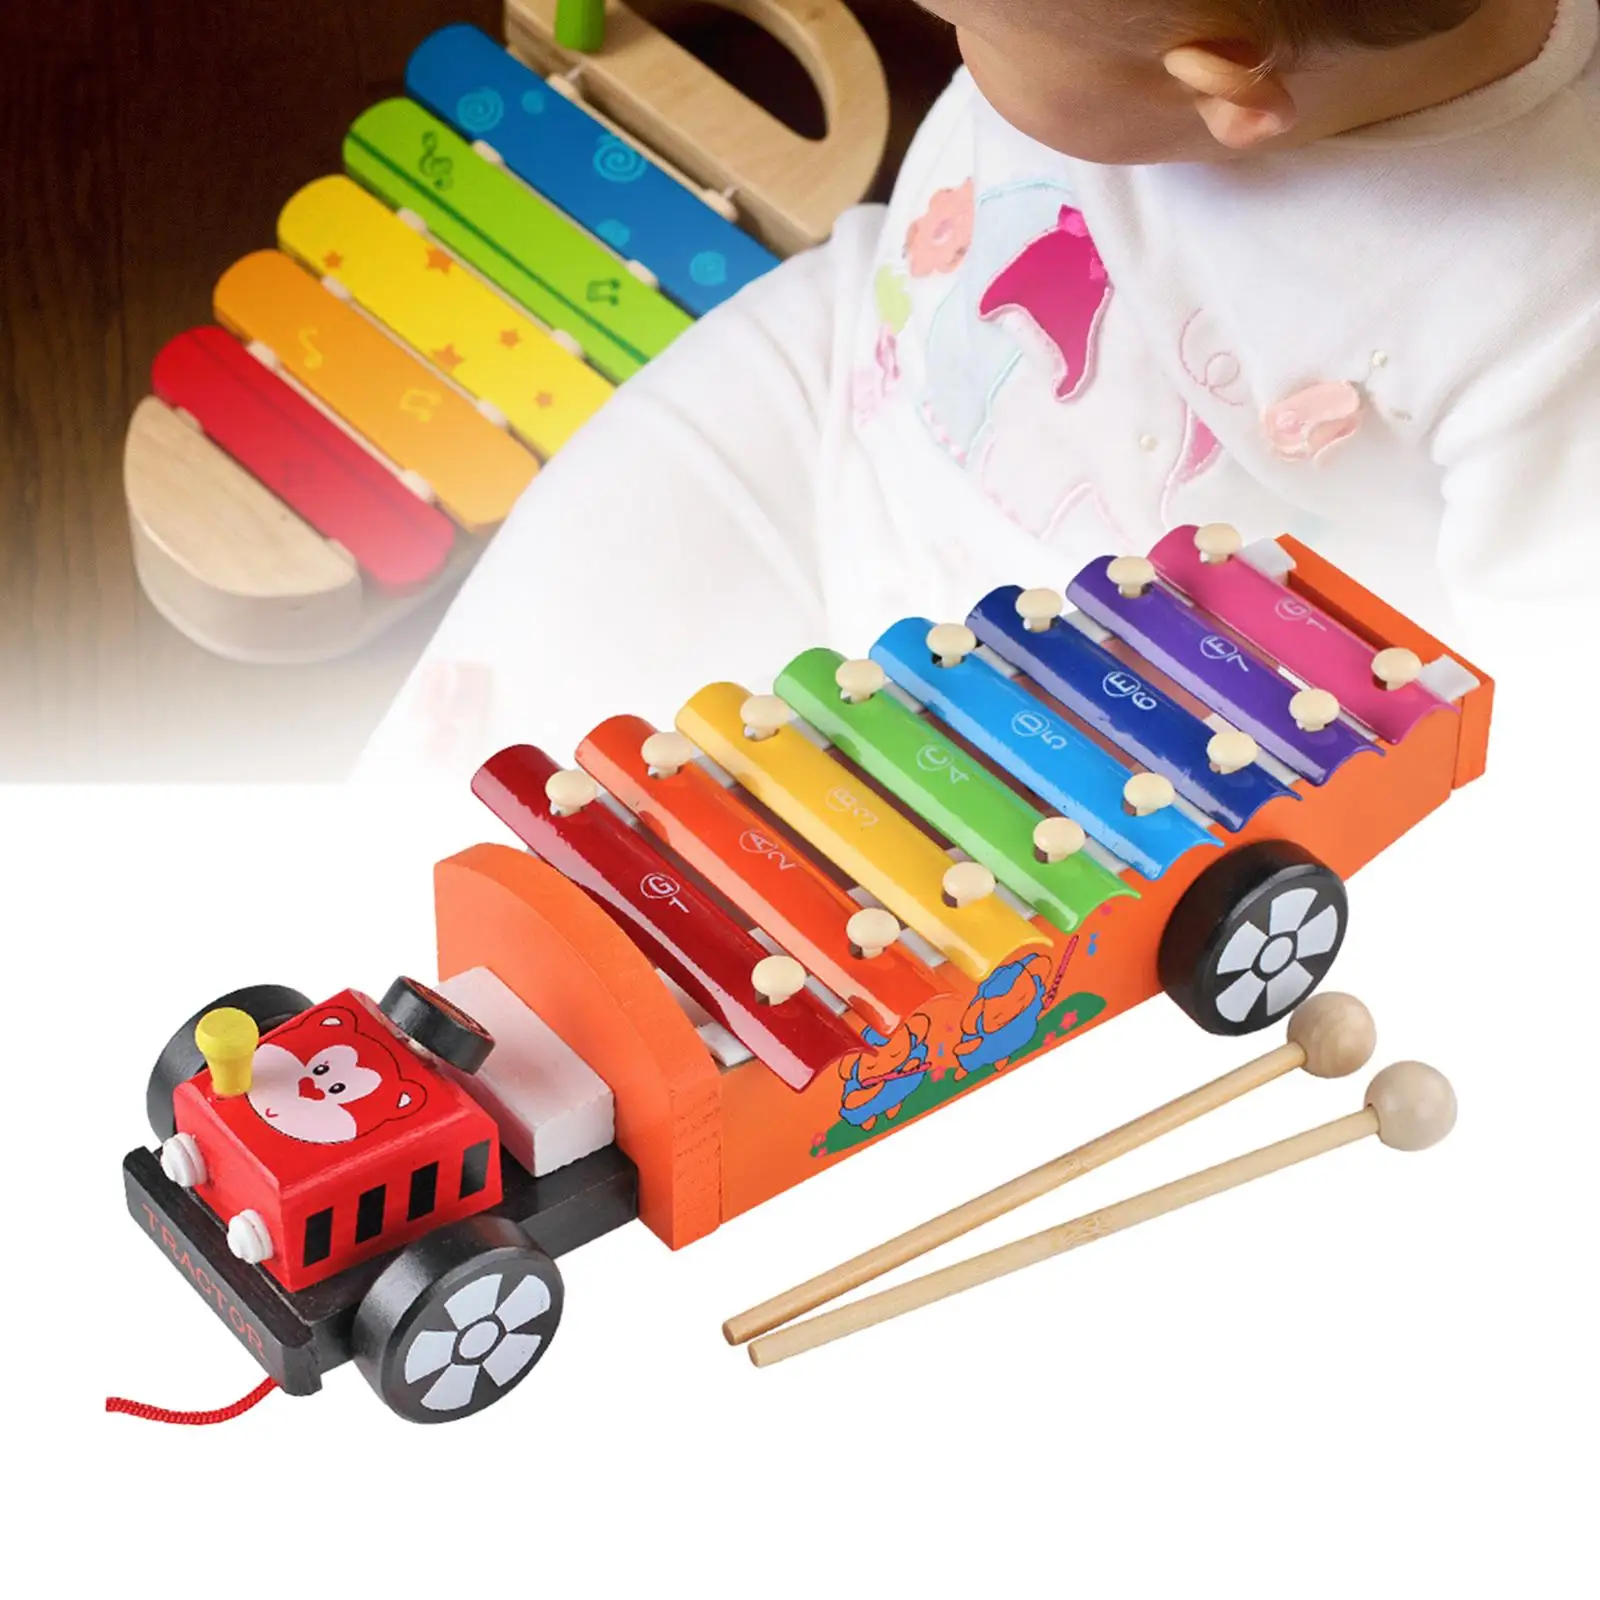 8 Note Metal Xylophone Montessori Toy Preschool Learning with 2 Mallets Kids Wood Xylophone Valentines Day Gifts for Kids Adults